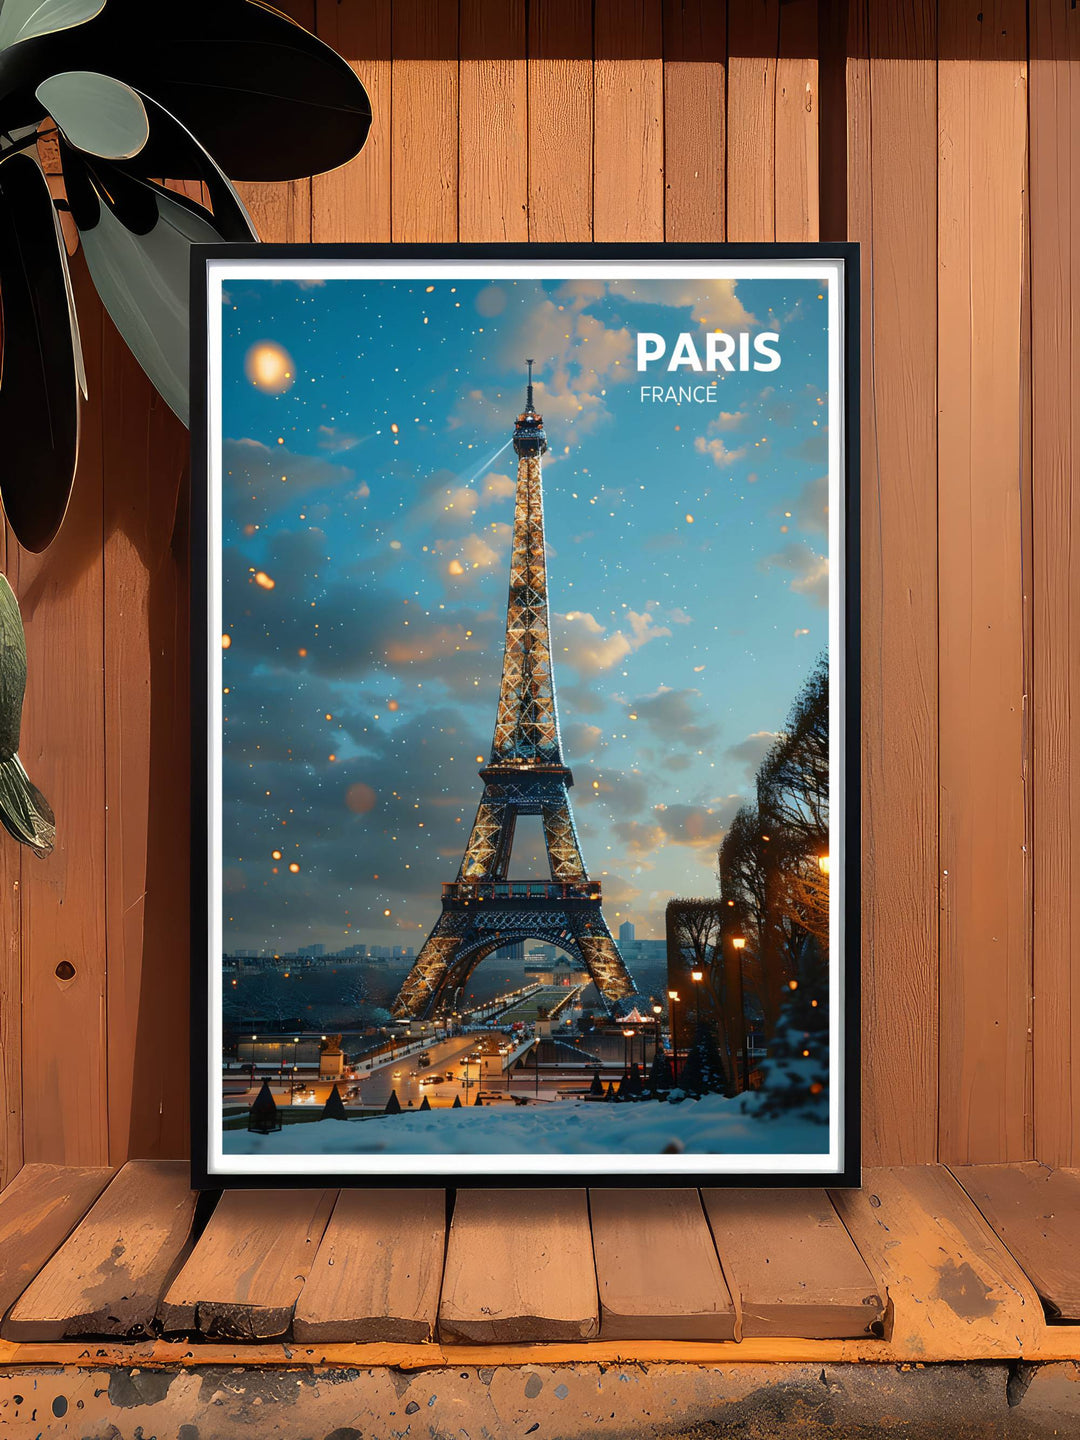 Experience the magic of Paris with our Paris Wall Art collection, showcasing the timeless beauty and romance of the city of light.